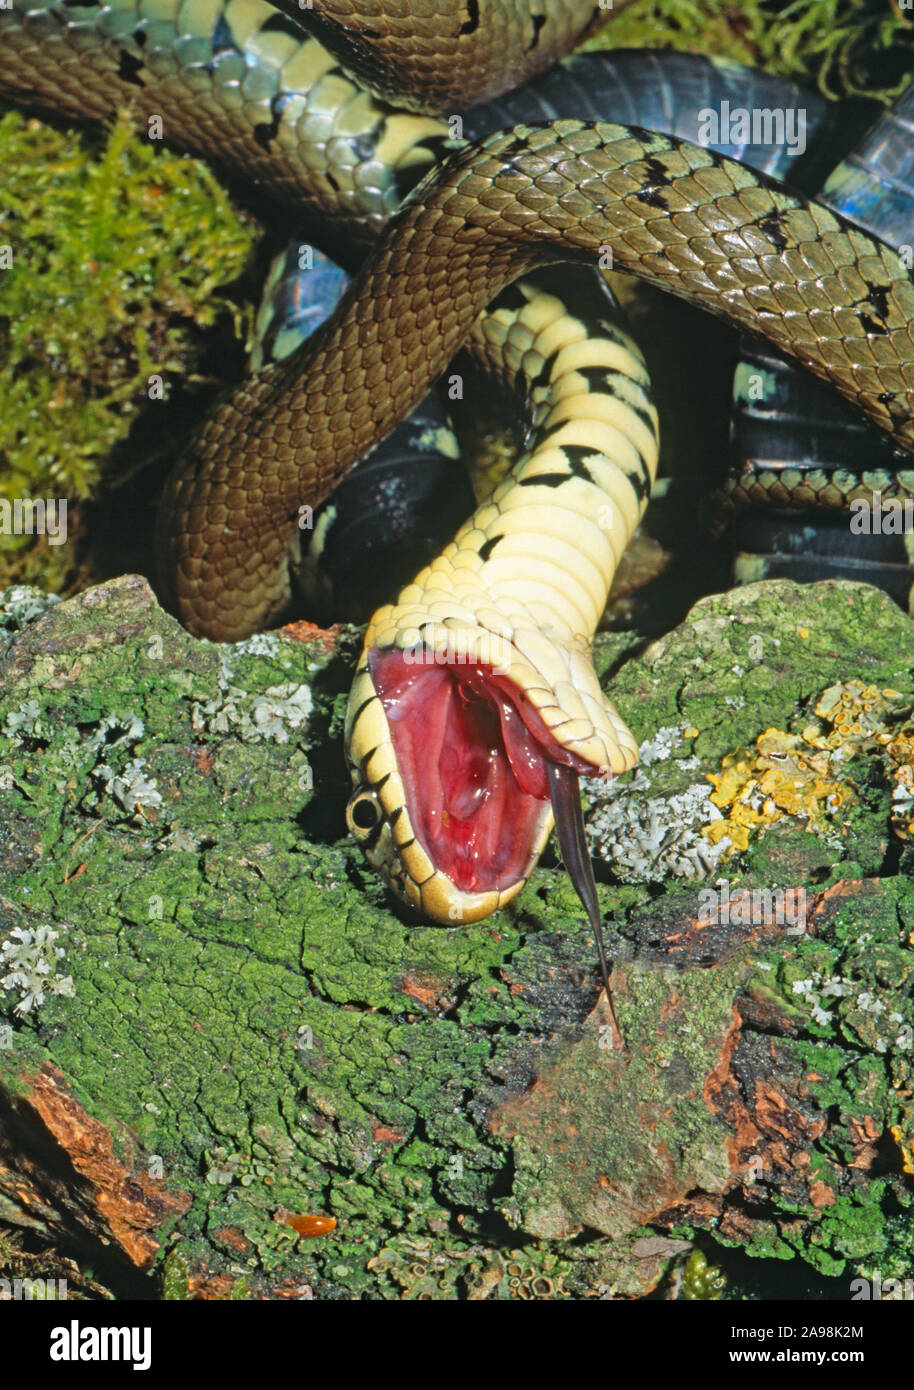 GRASS SNAKE (Natrix natrix). Occasional behaviour after holding, posture, slow writhing, contortion, mouth open tongue extended, feigning death, dead. Stock Photo